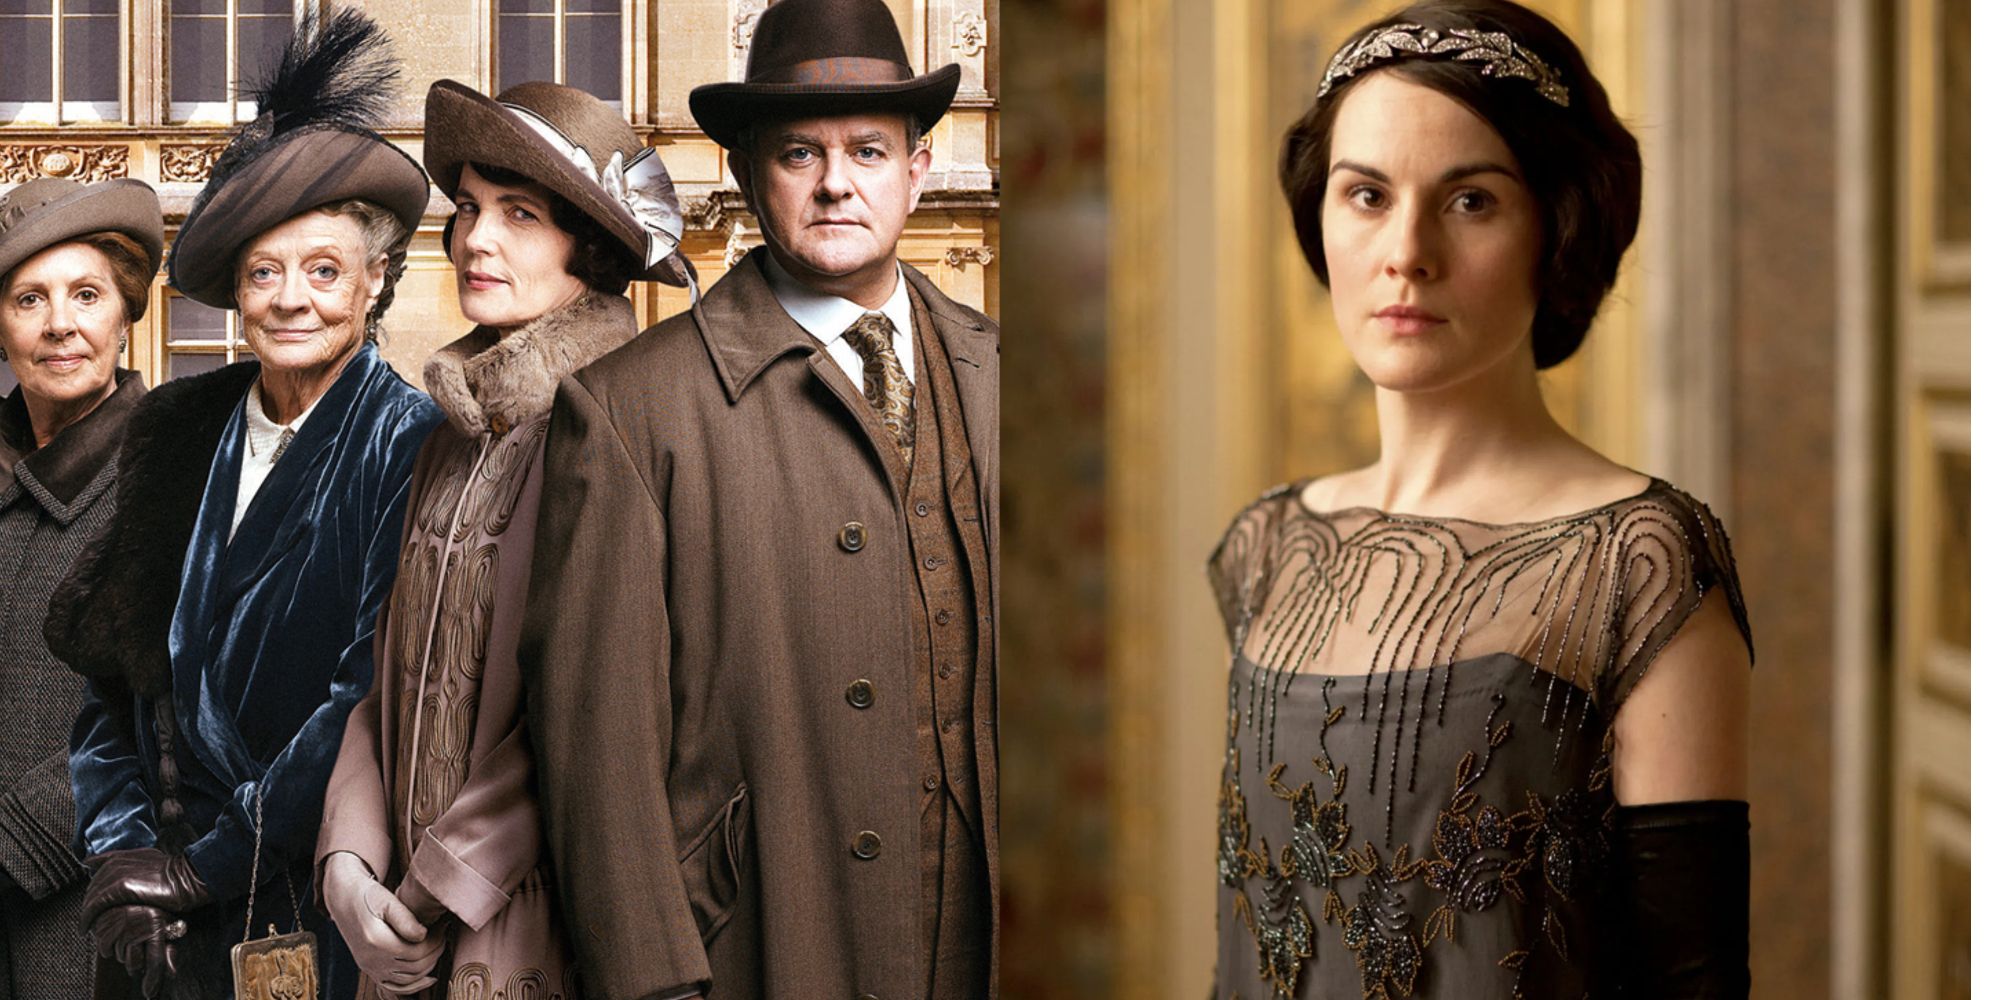 Split image of Downton Abbey characters